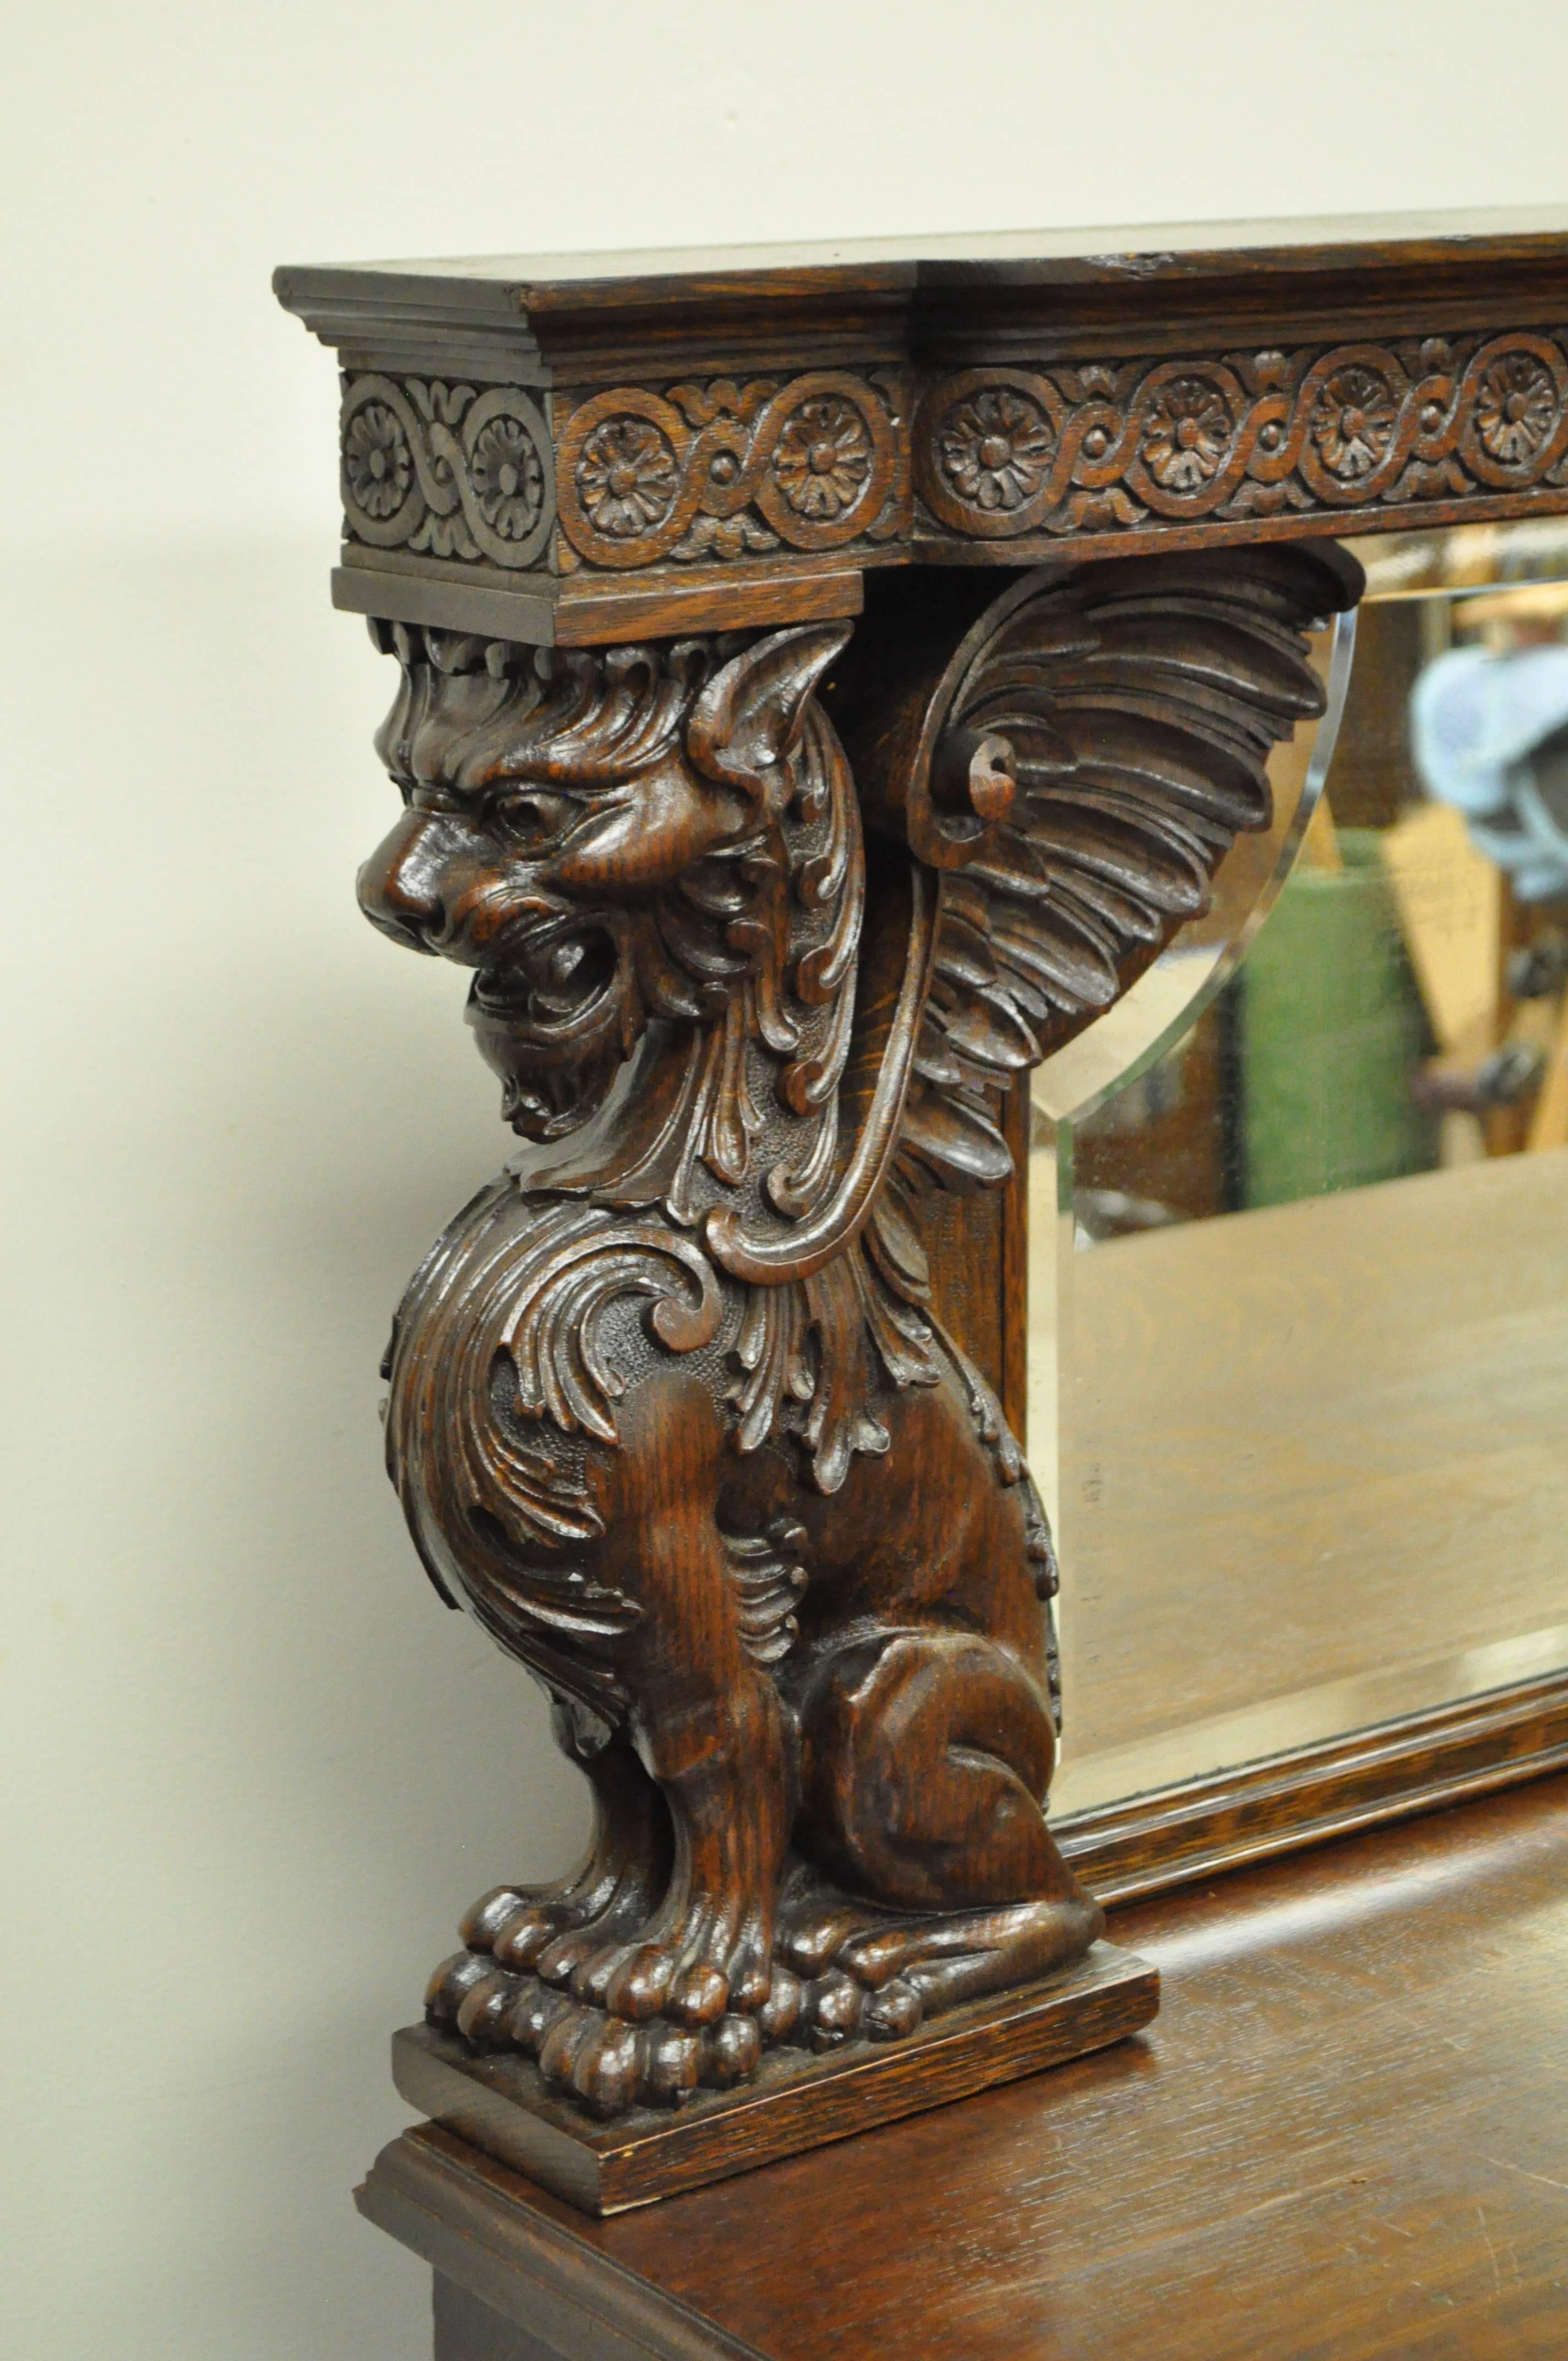 19th century Victorian Quartersawn oak figural sideboard with shaped beveled mirror. Possibly by RJ Horner NY. Item features full winged griffins and lion carved columns, beautiful quartered oak construction, paw feet, lower drop front with hidden